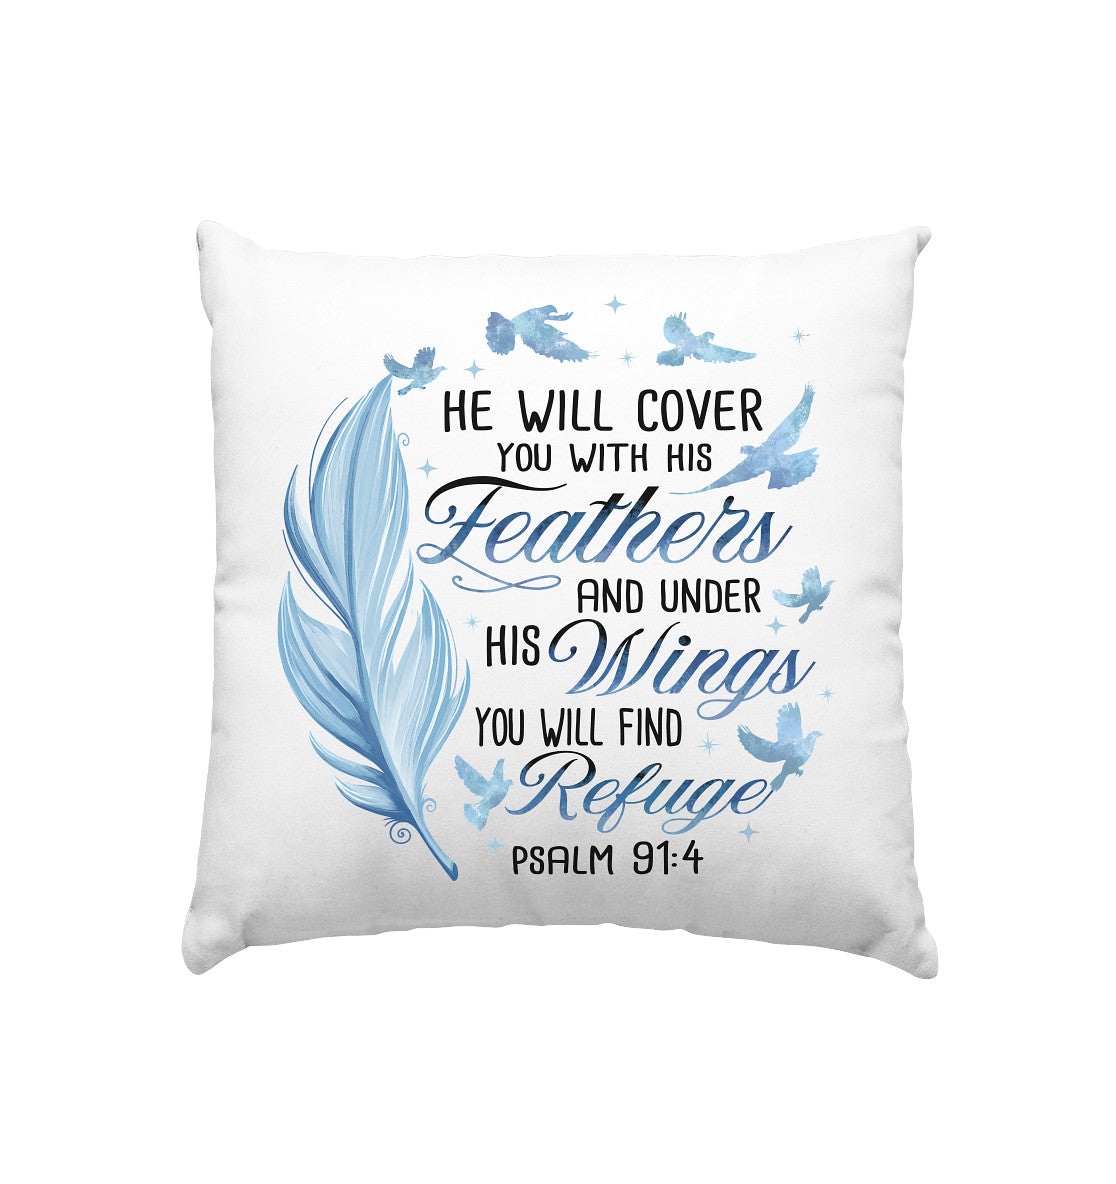 Ps 91,4 - He will cover - Kissen 40x40cm